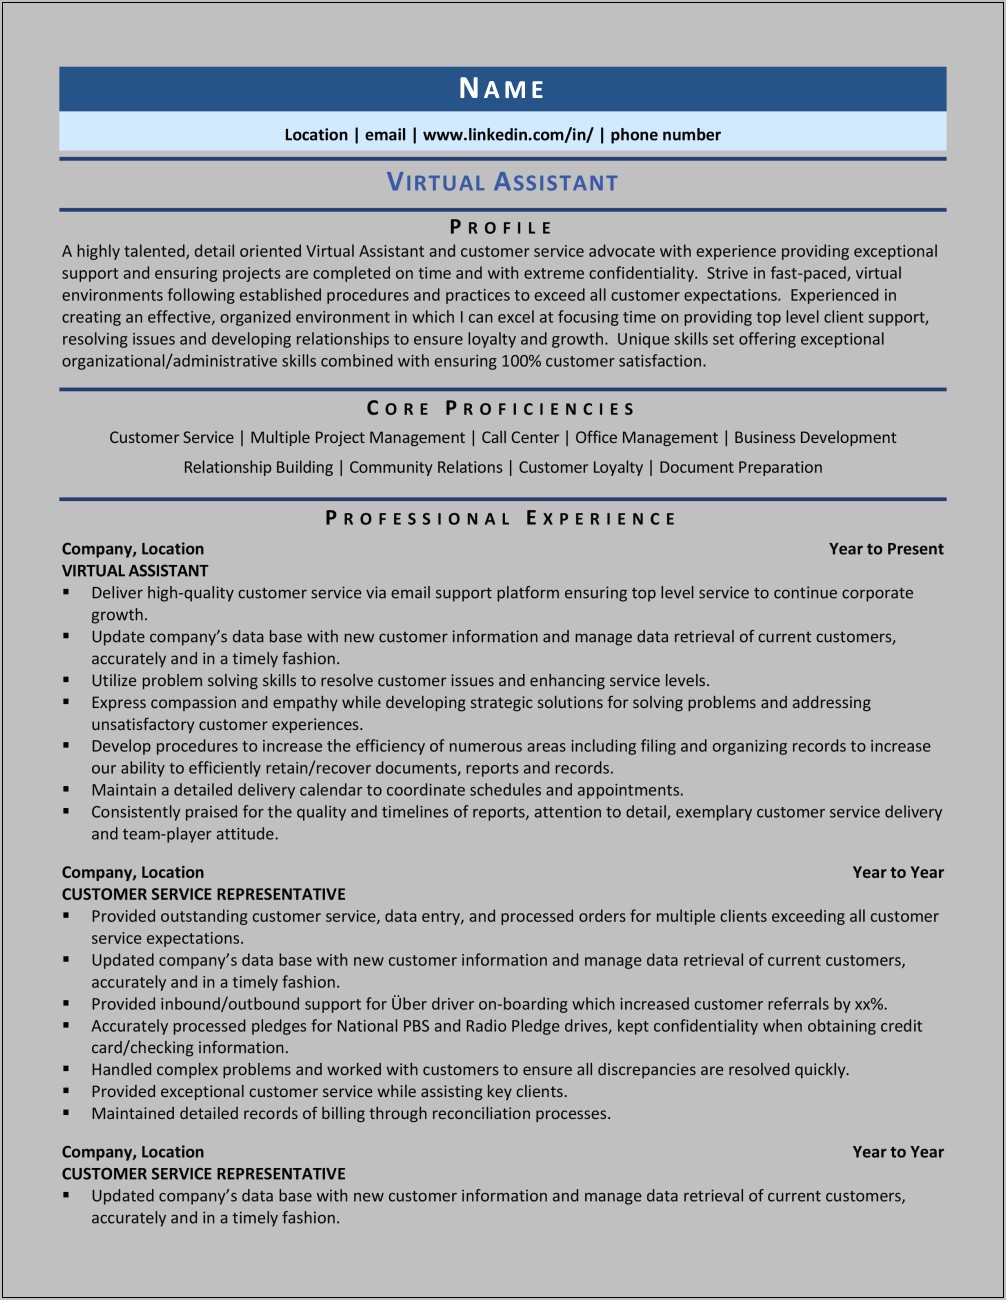 Sample Resume Personal Assistant No Experience